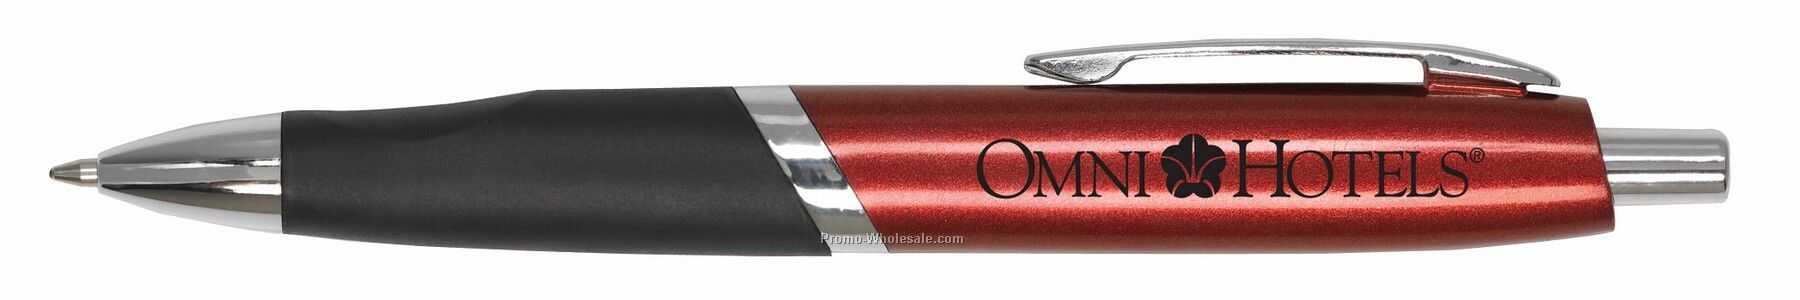 Orion Metallic Color Barrel Pen With Tapered Grip - 4 Hour Ship